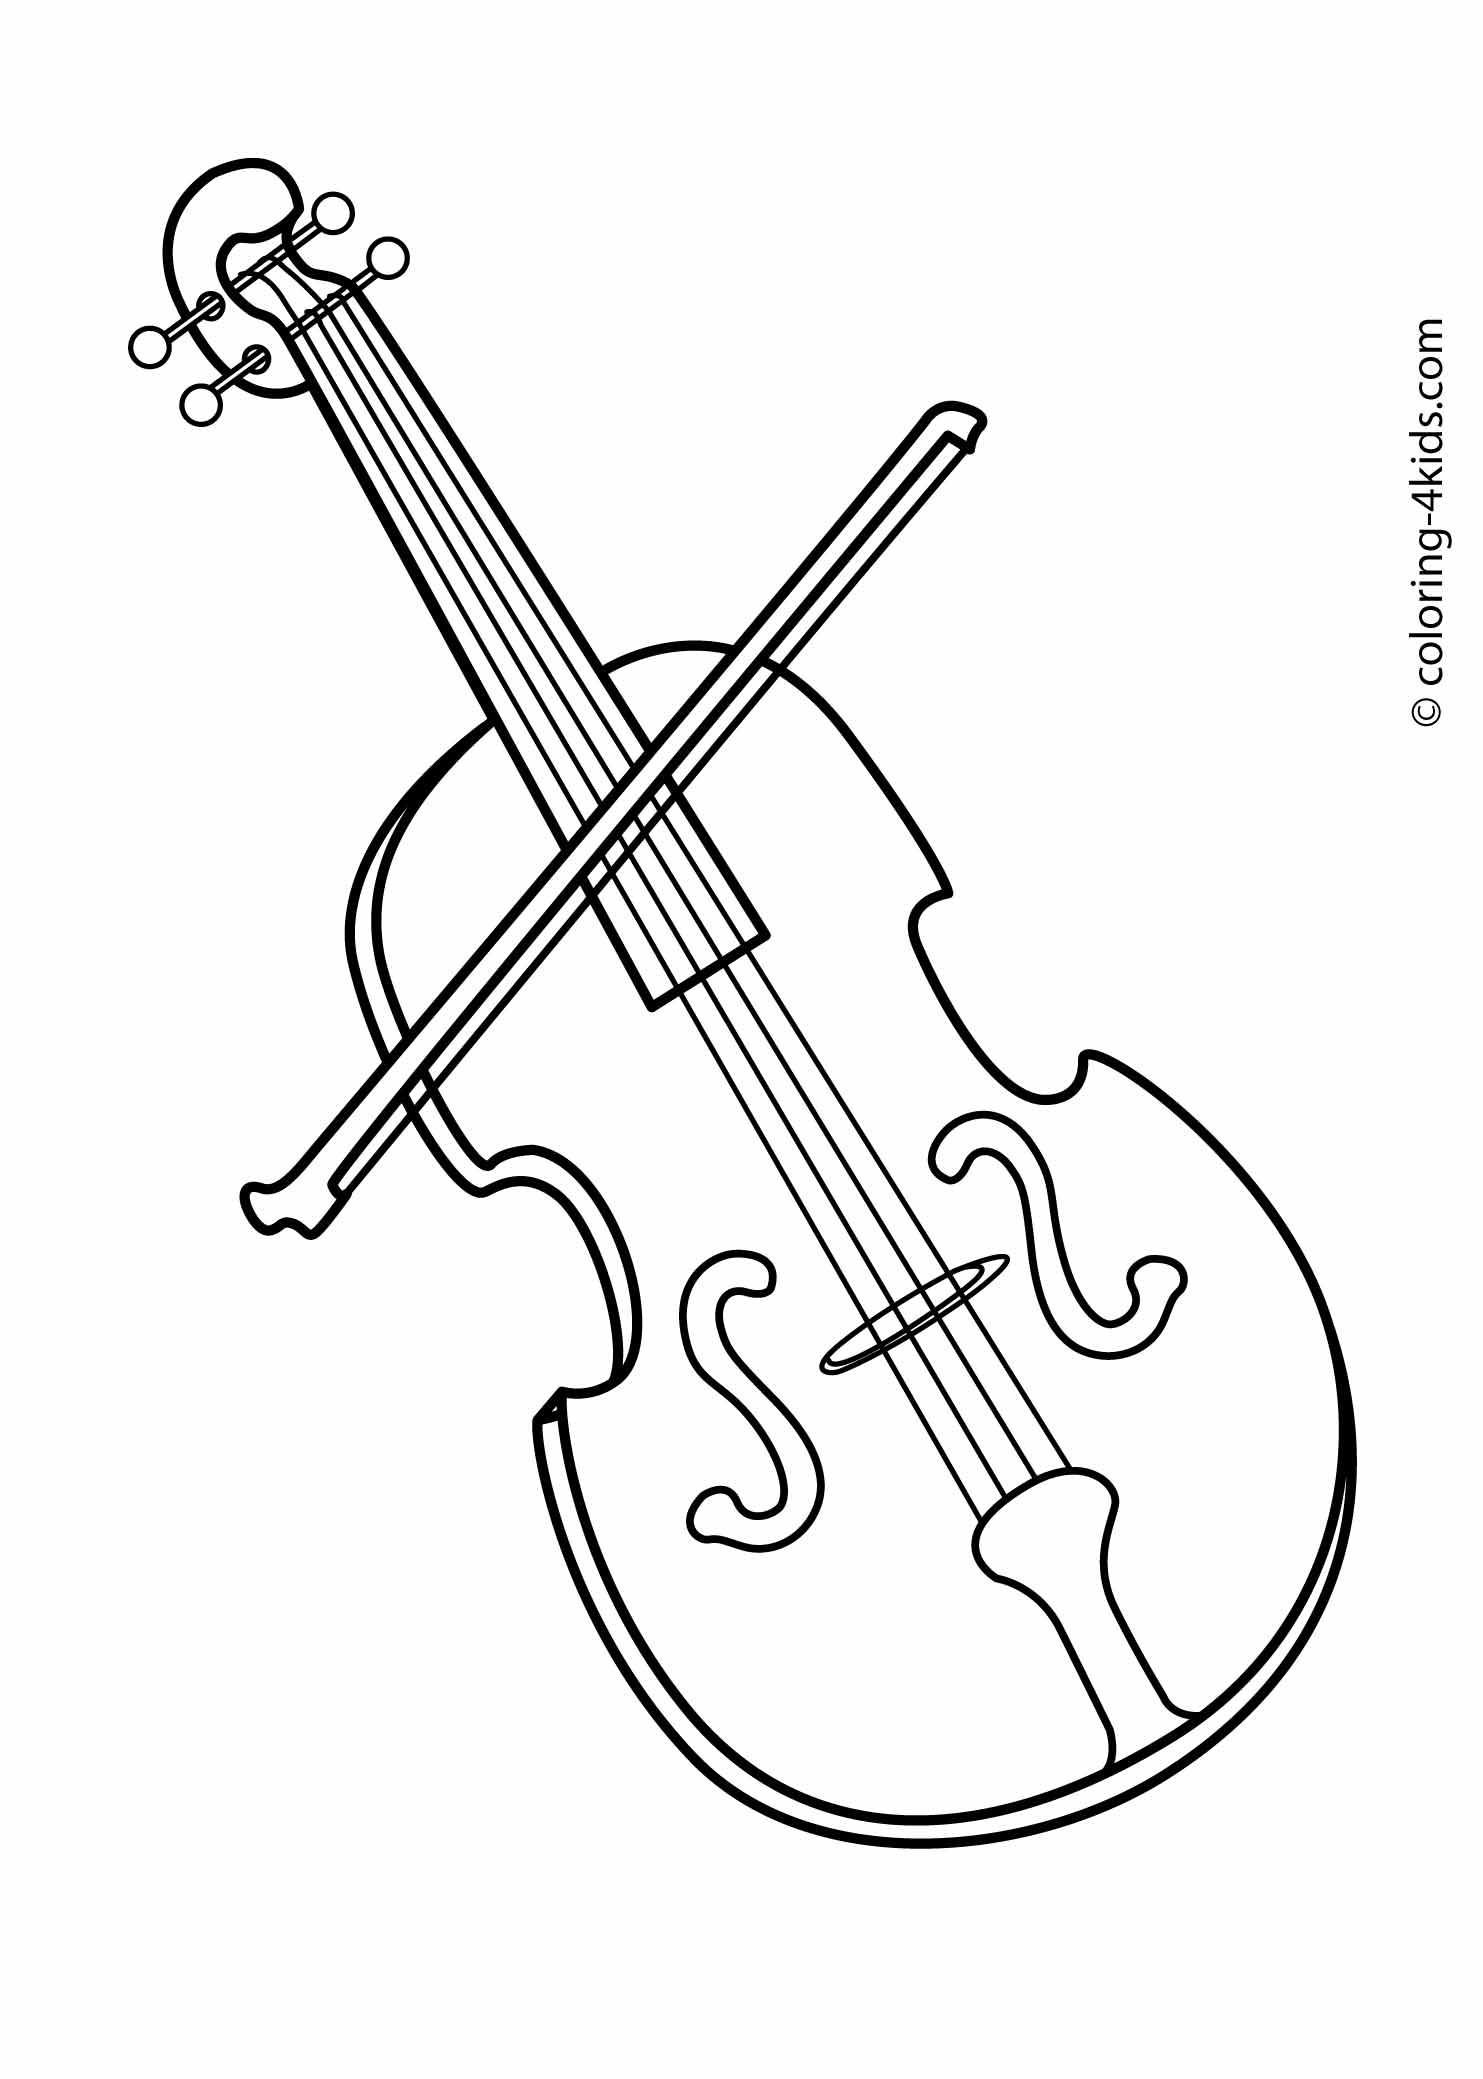 Free Musical Instruments Drawings, Download Free Musical Instruments